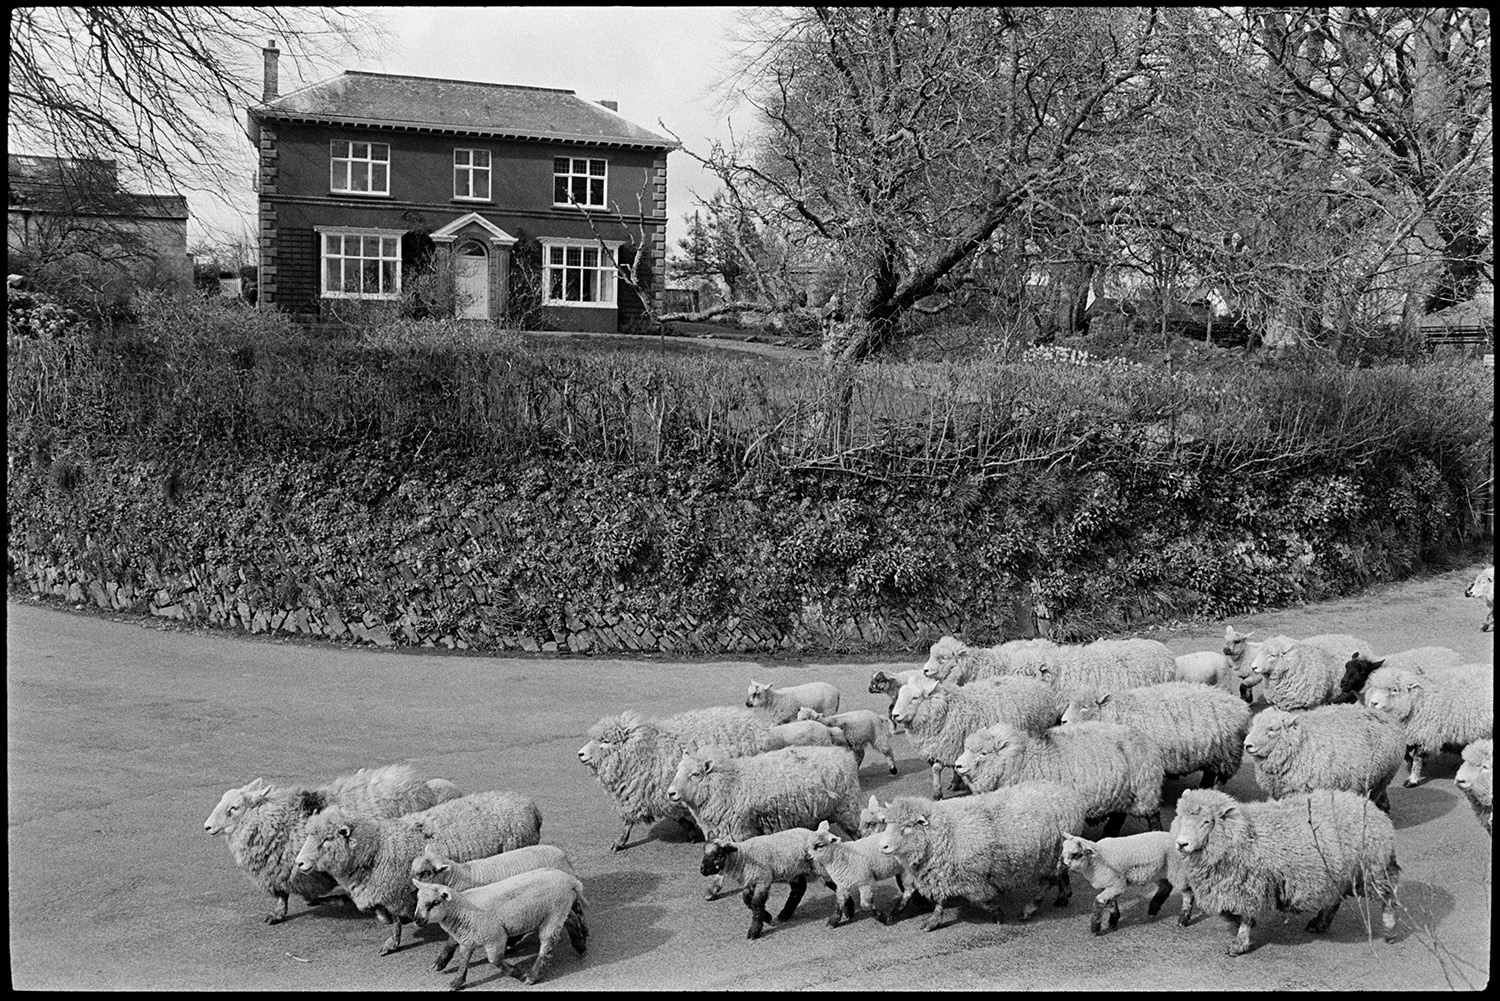 Sheep going through village. 
[Sheep and lambs being herded along a road past Greenwarren House, the former location of The Beaford Centre.]